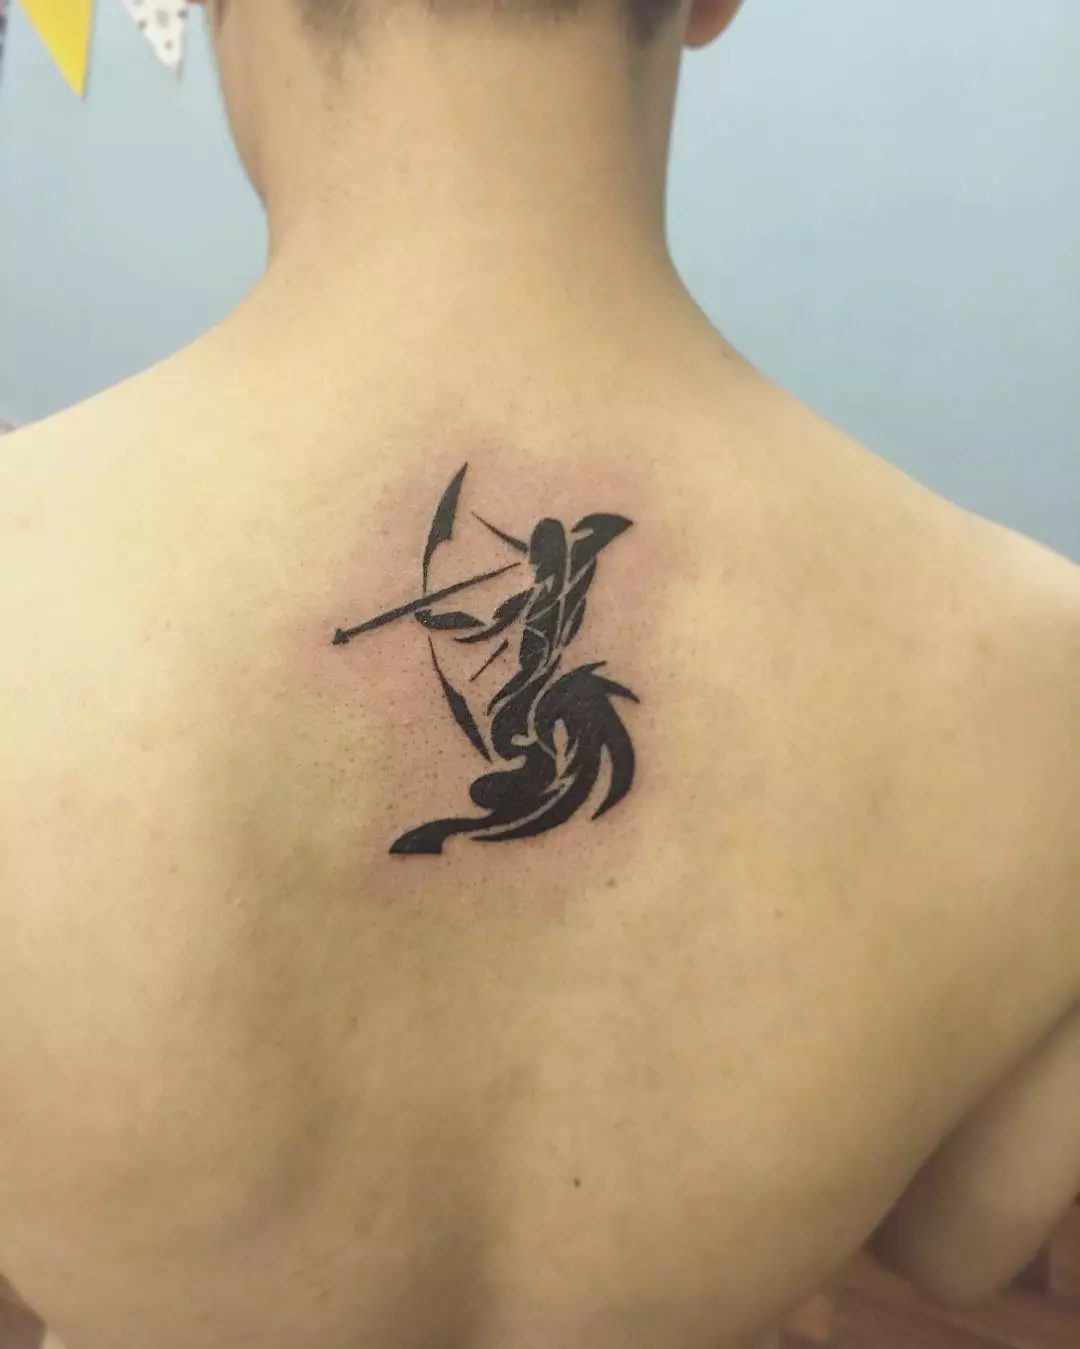 30 Best Sagittarius Tattoo Designs Types And Meanings (2019)